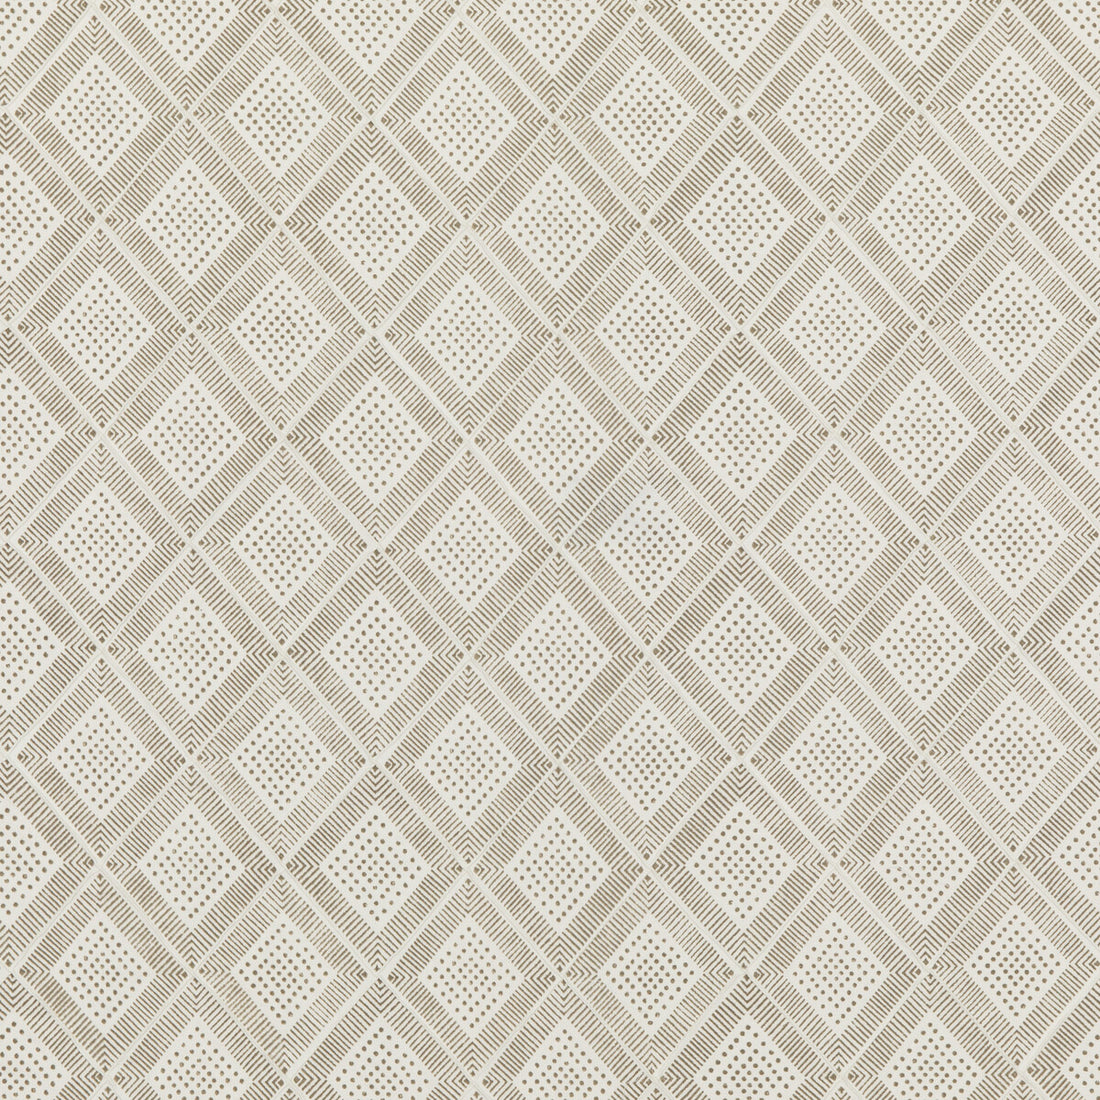 Block Trellis fabric in stone color - pattern PP50484.4.0 - by Baker Lifestyle in the Block Party collection